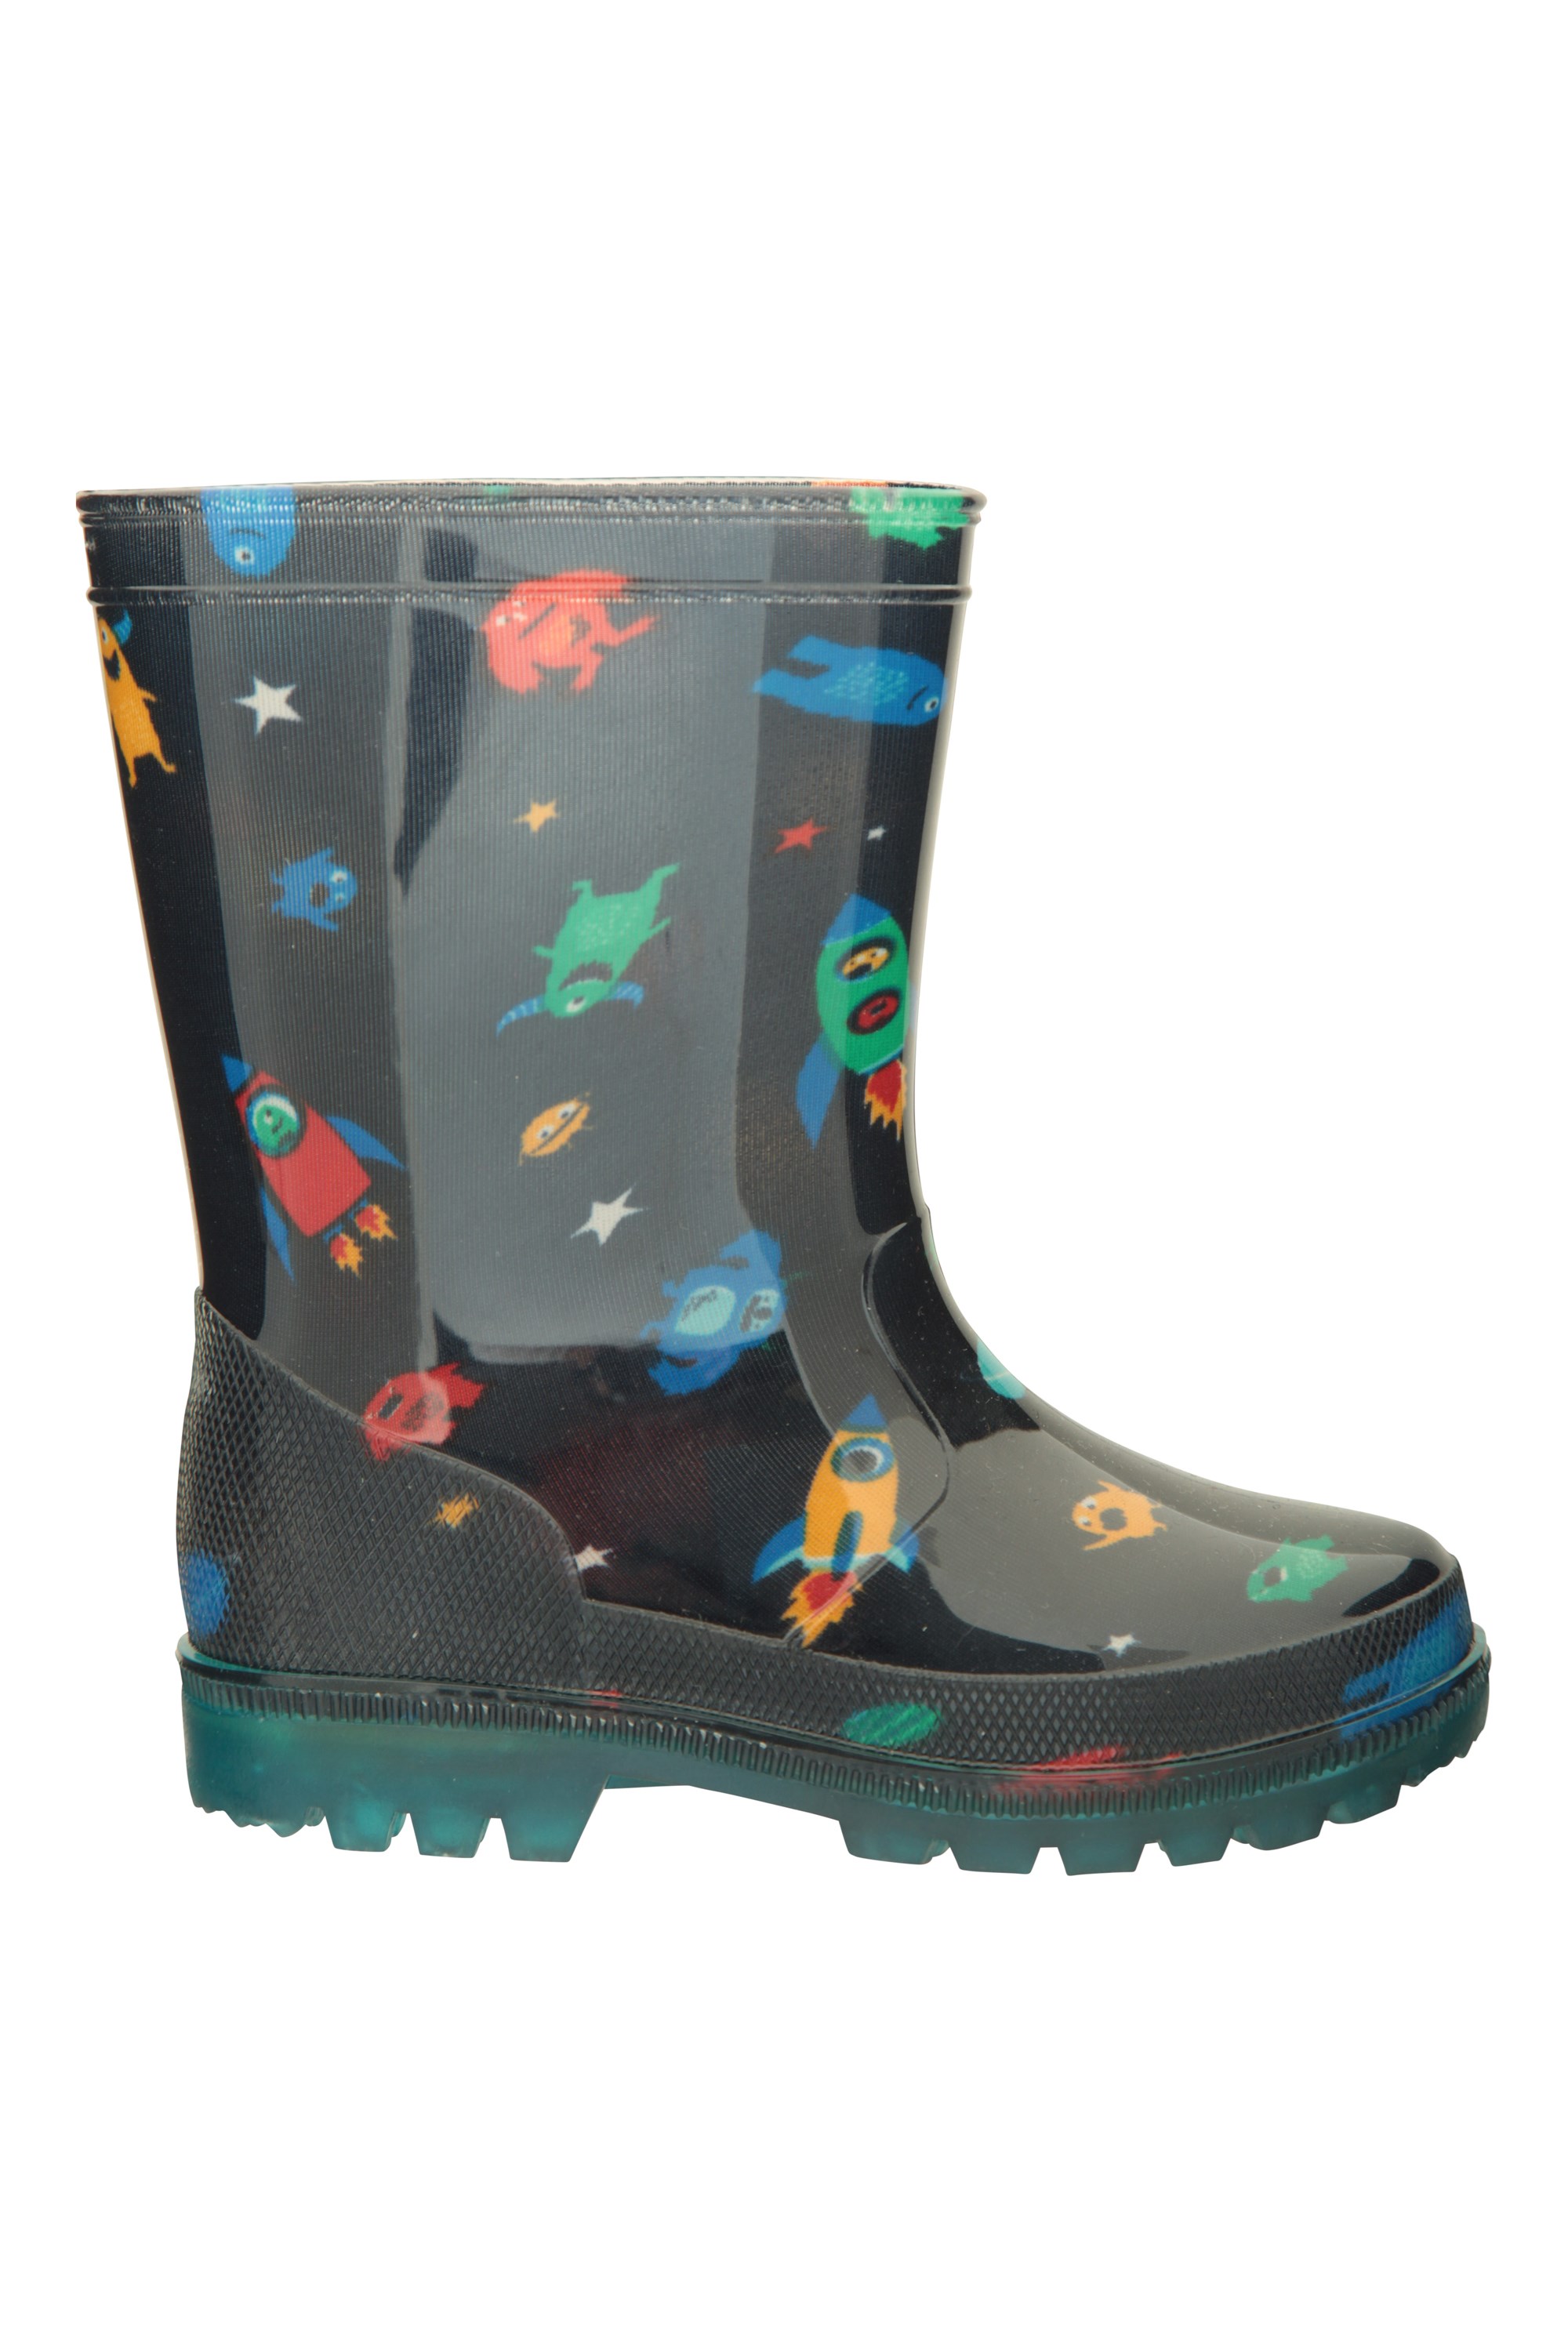 childrens wellies with lights